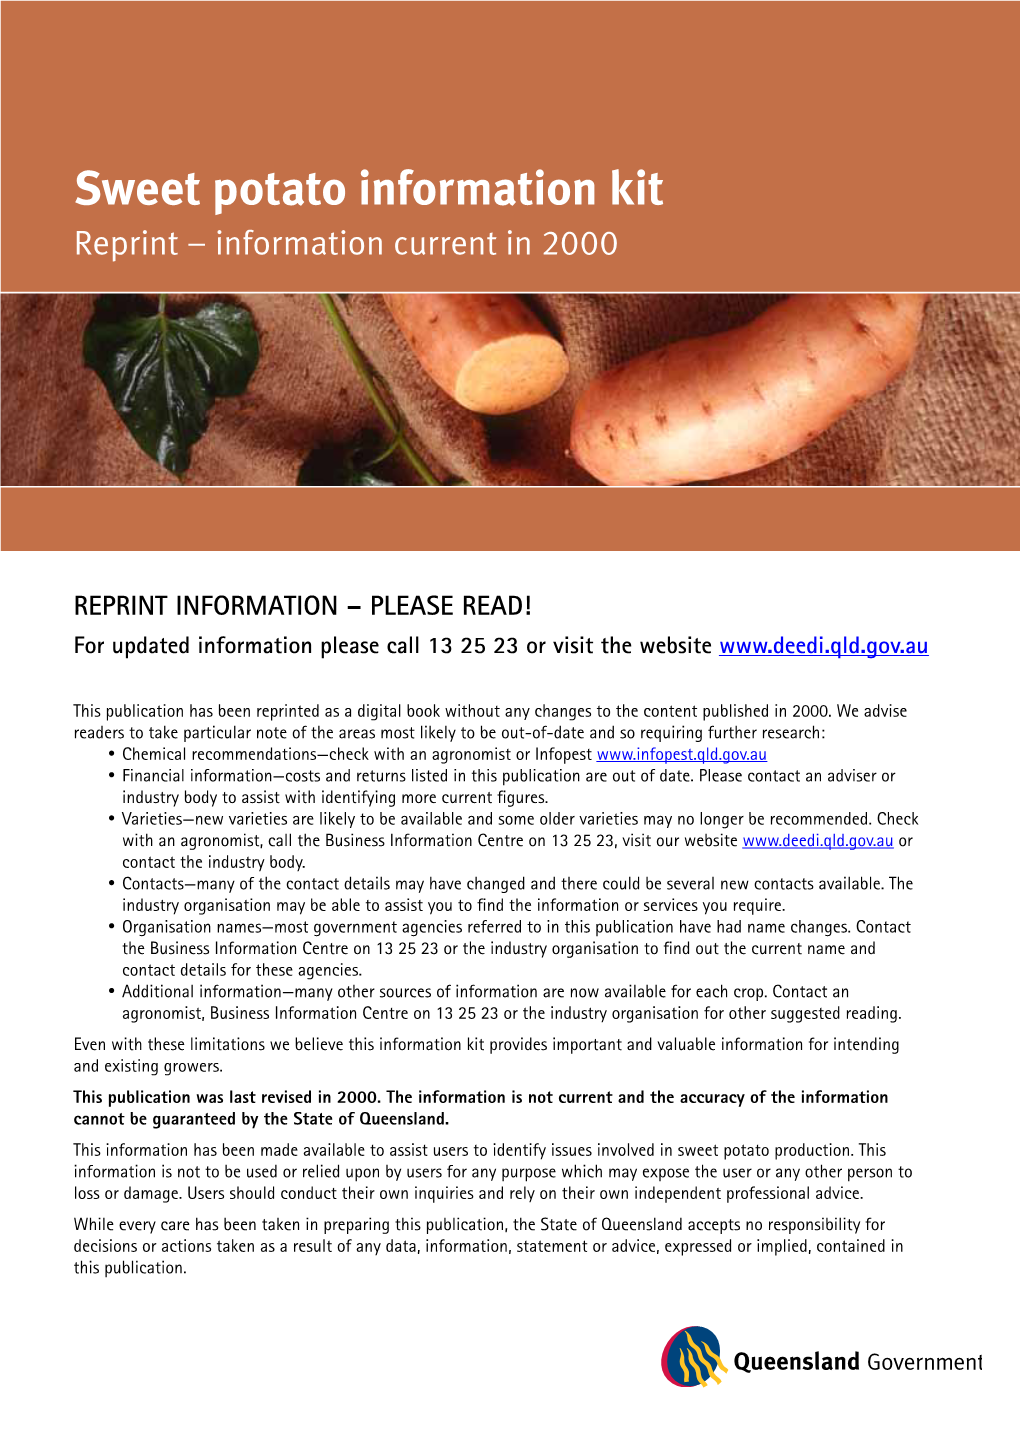 Sweet Potato Information Kit Reprint – Information Current in 2000